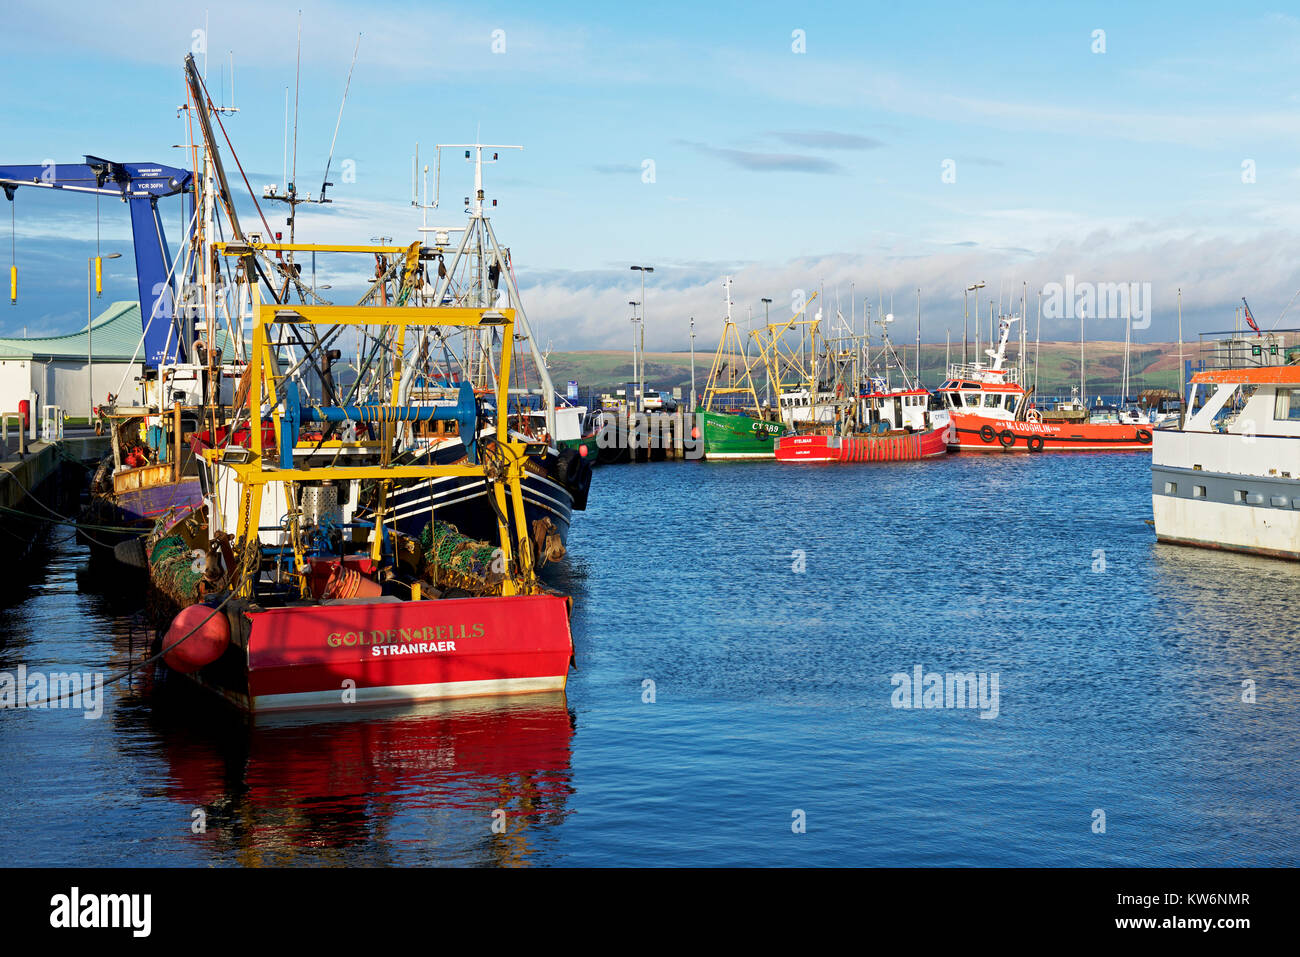 Fishing boats in the harbour, Stranraer, Dumfries and Galloway, Scotland UK Stock Photo